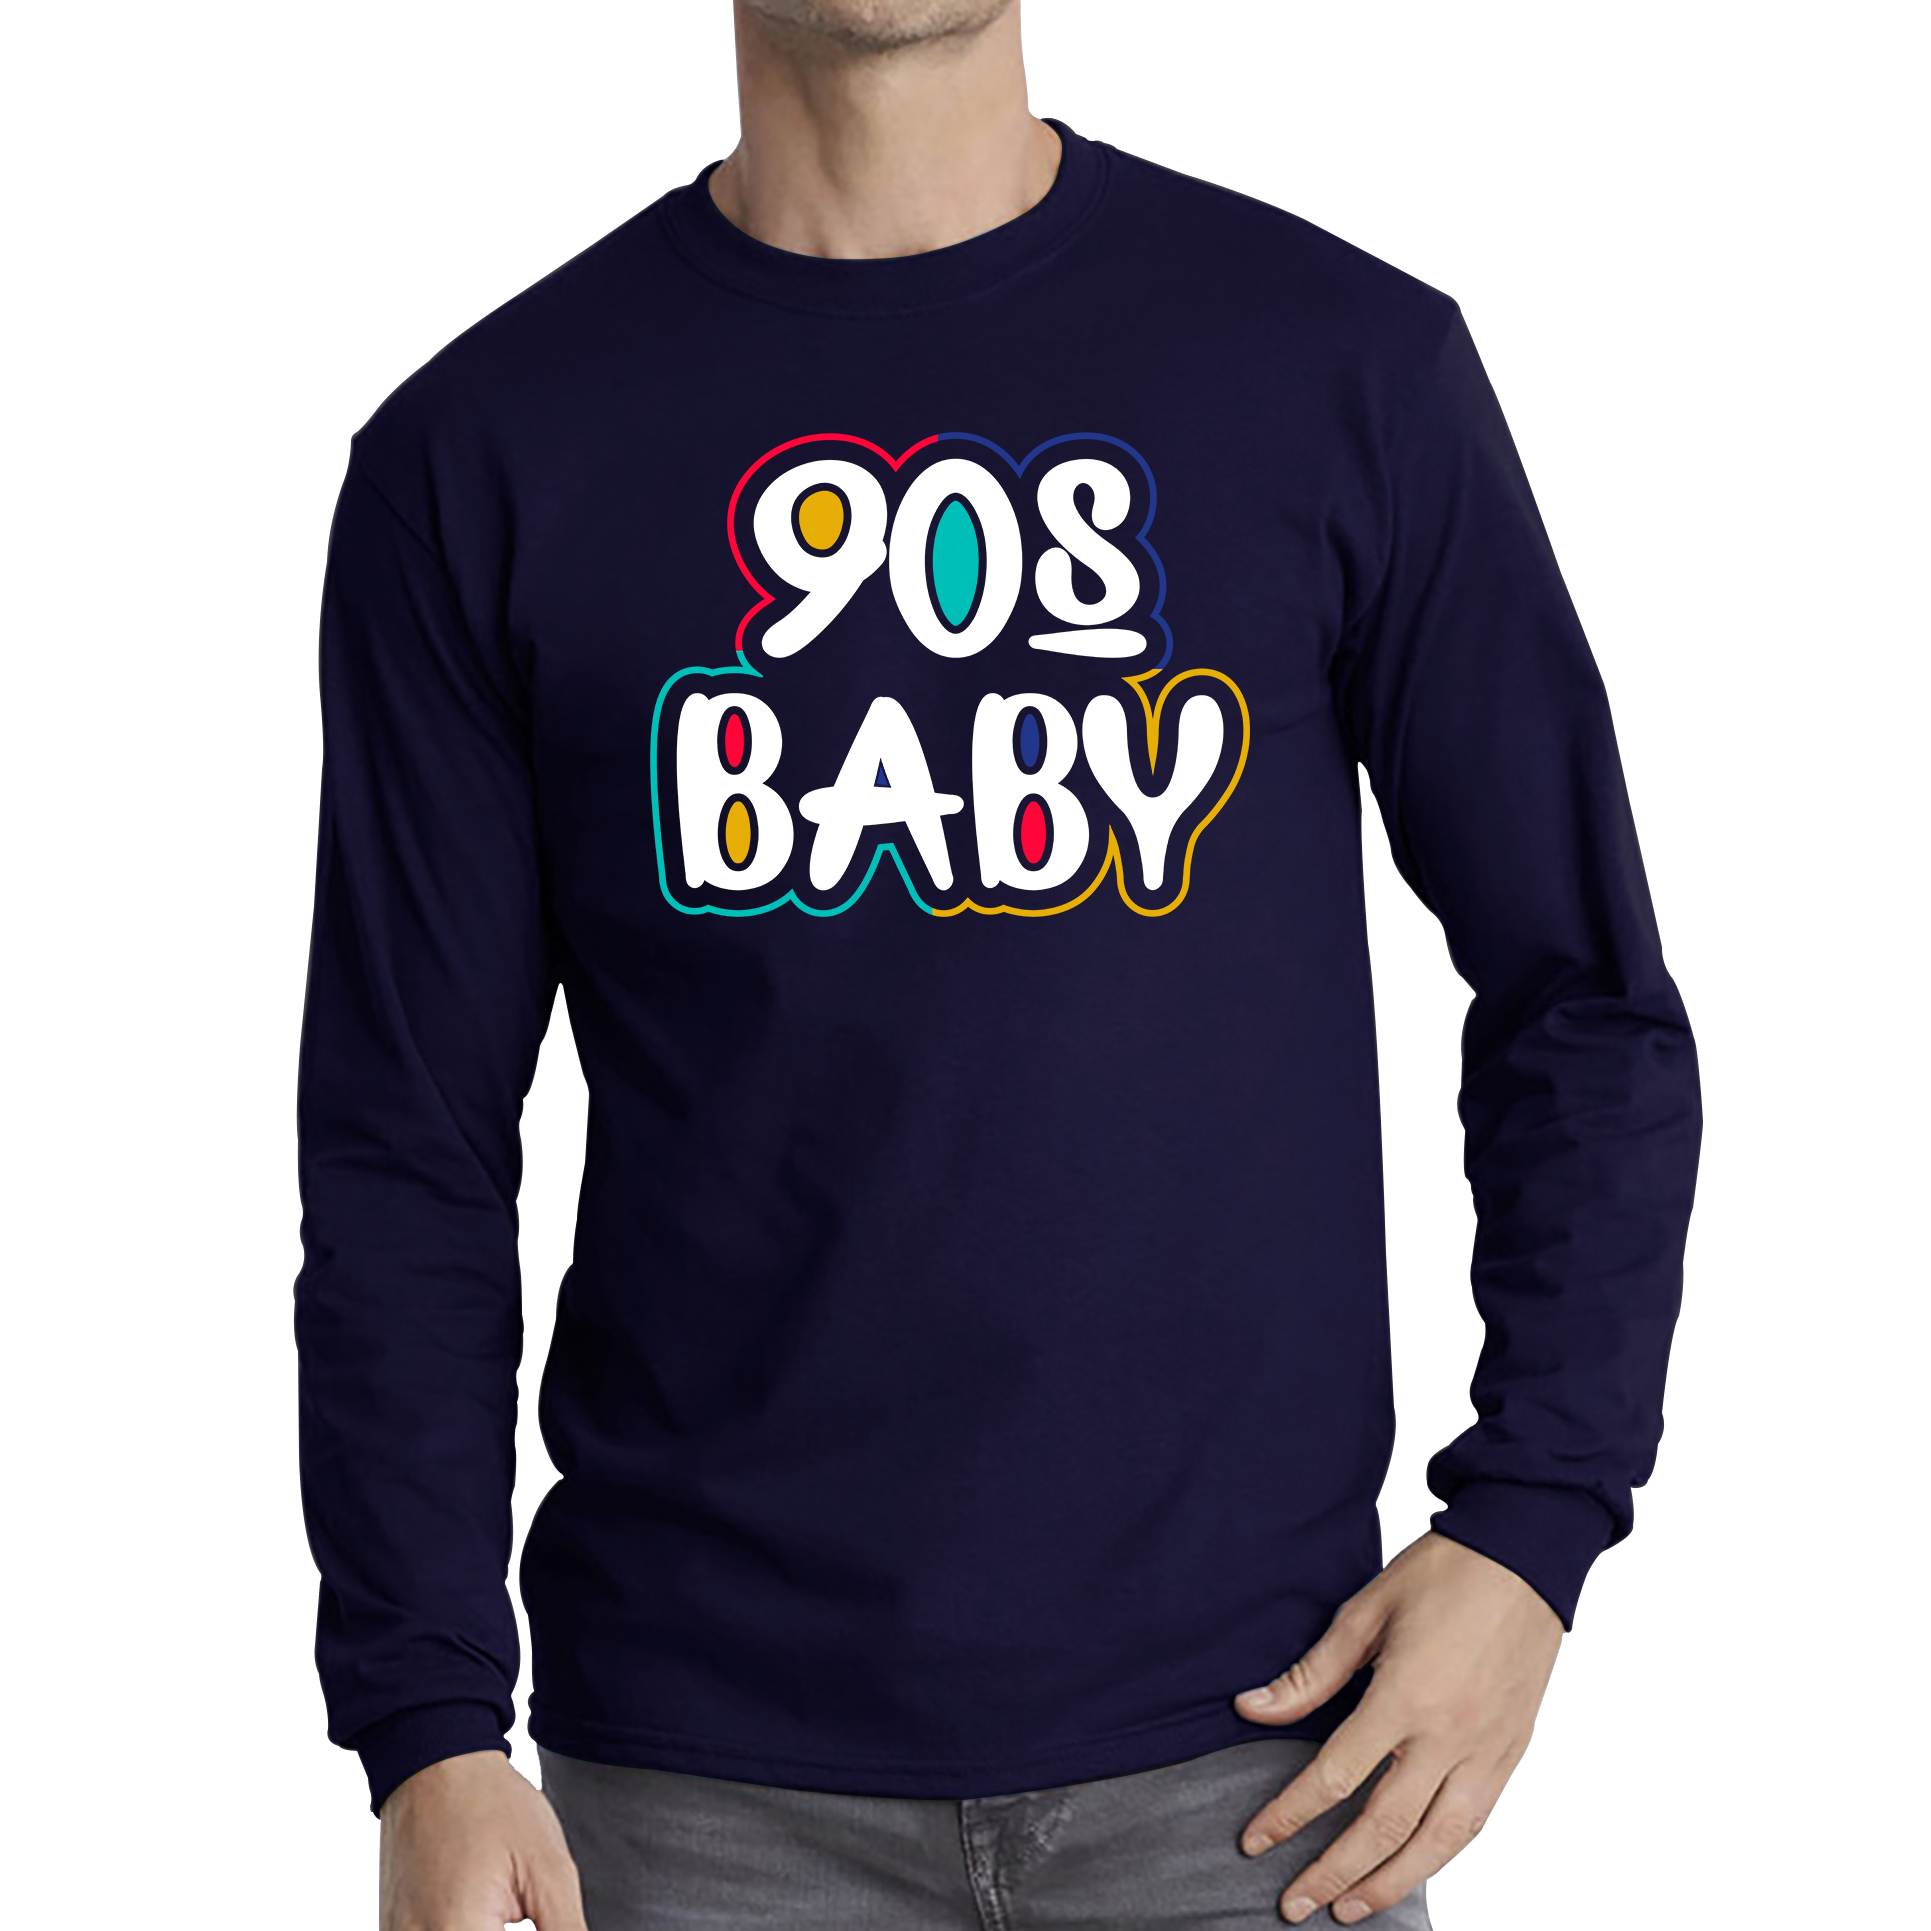 90s Baby Shirt Awesome cool 90's baby fashion Vintag Funny Joke Novelty Design Long Sleeve T Shirt